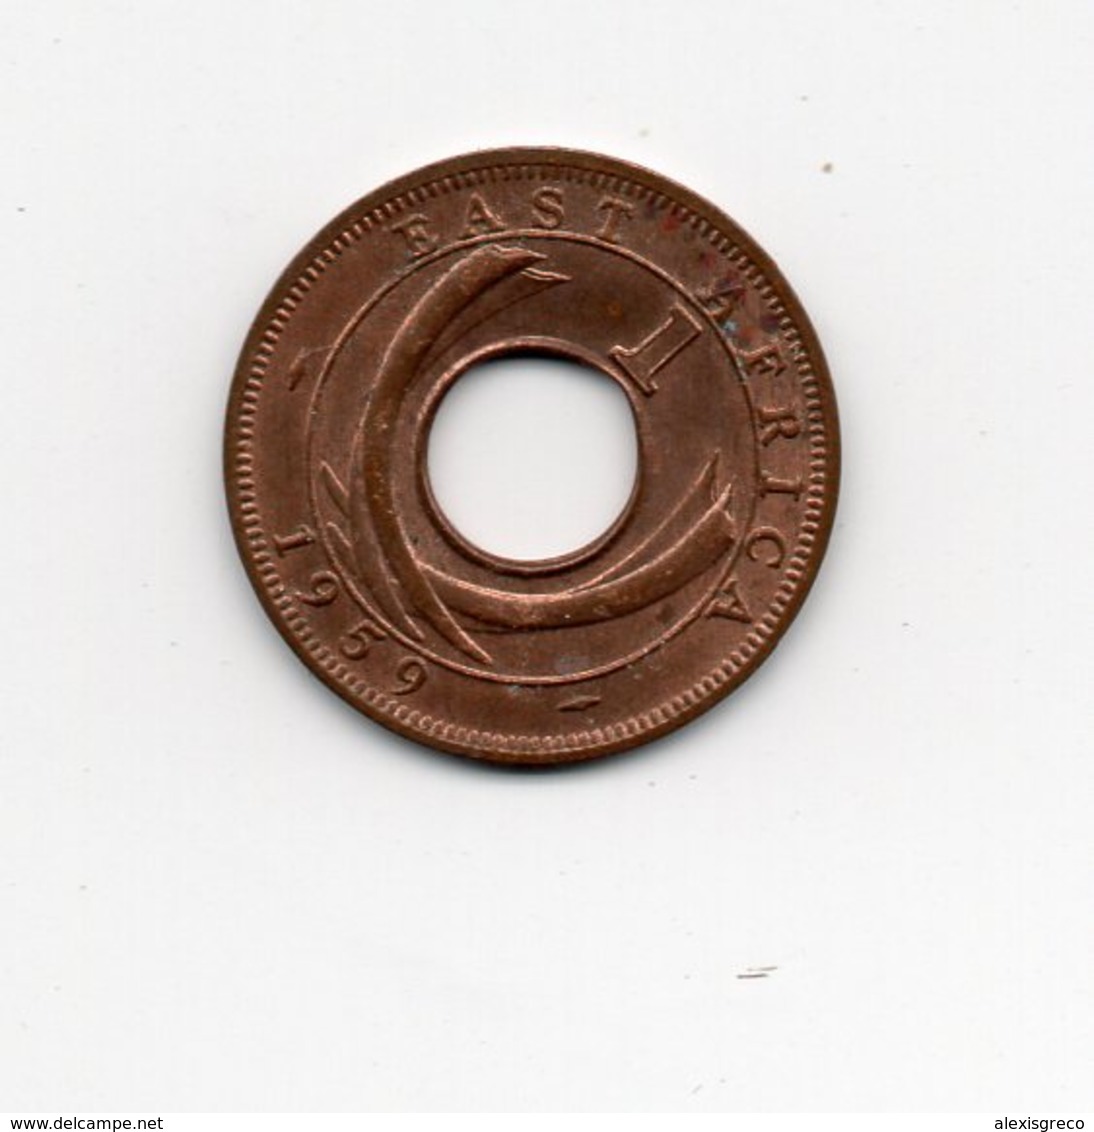 BRITISH EAST AFRICA USED ONE CENT COIN BRONZE Of 1959 H. - Africa Orientale E Protettorato D'Uganda